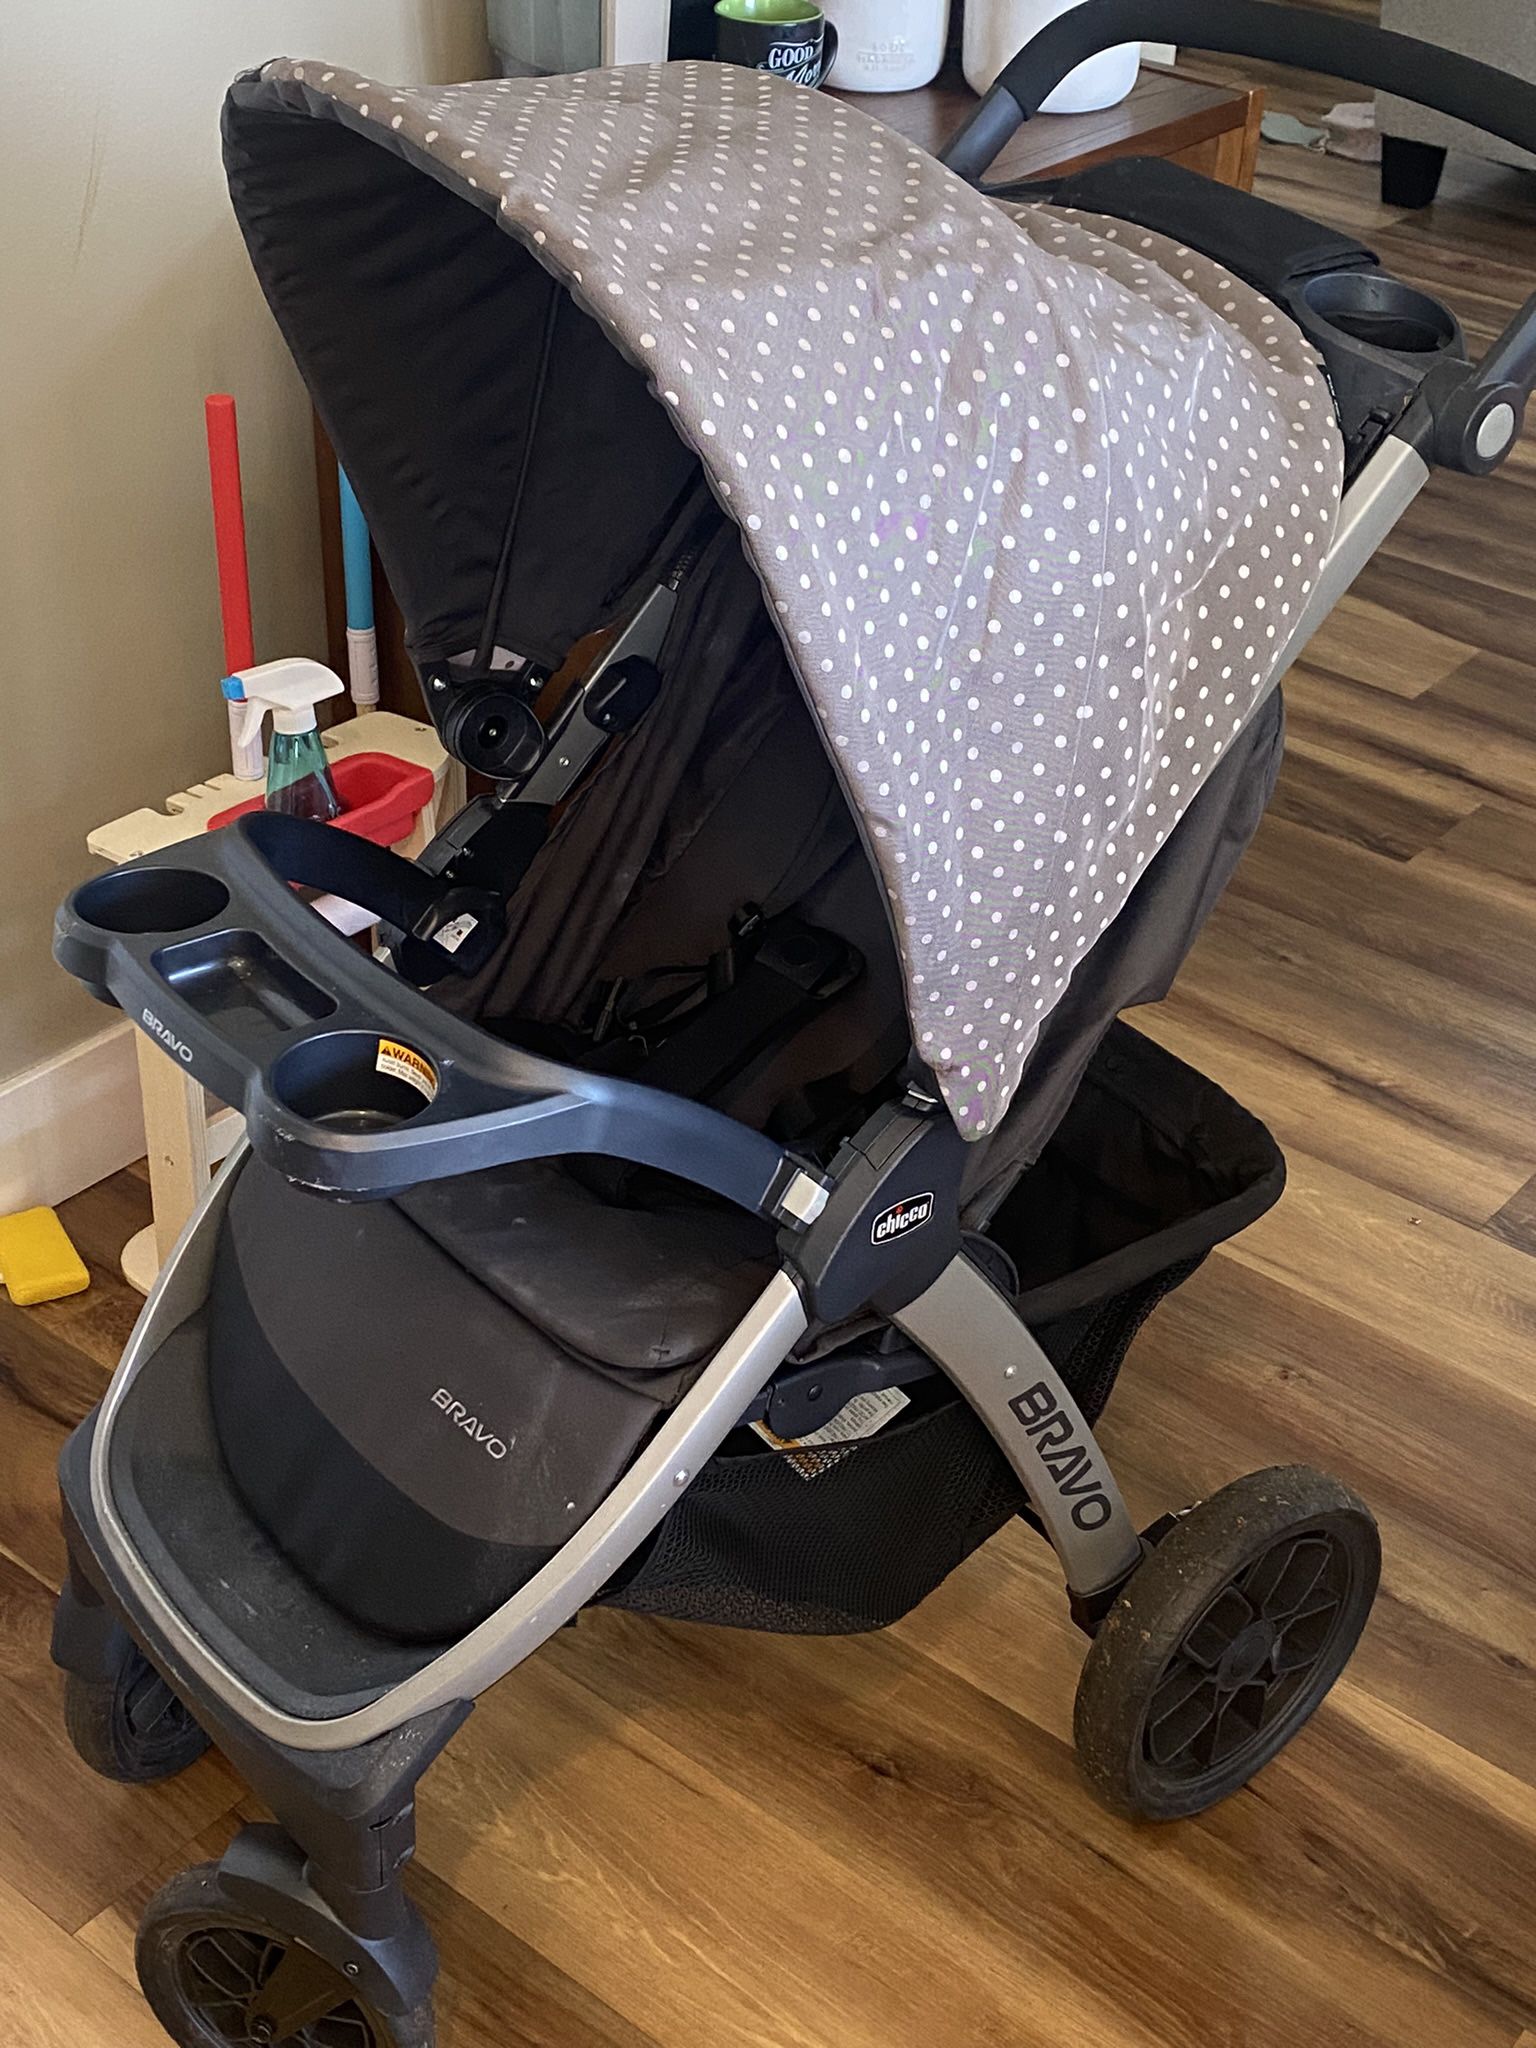 Graco Carseat And Stroller